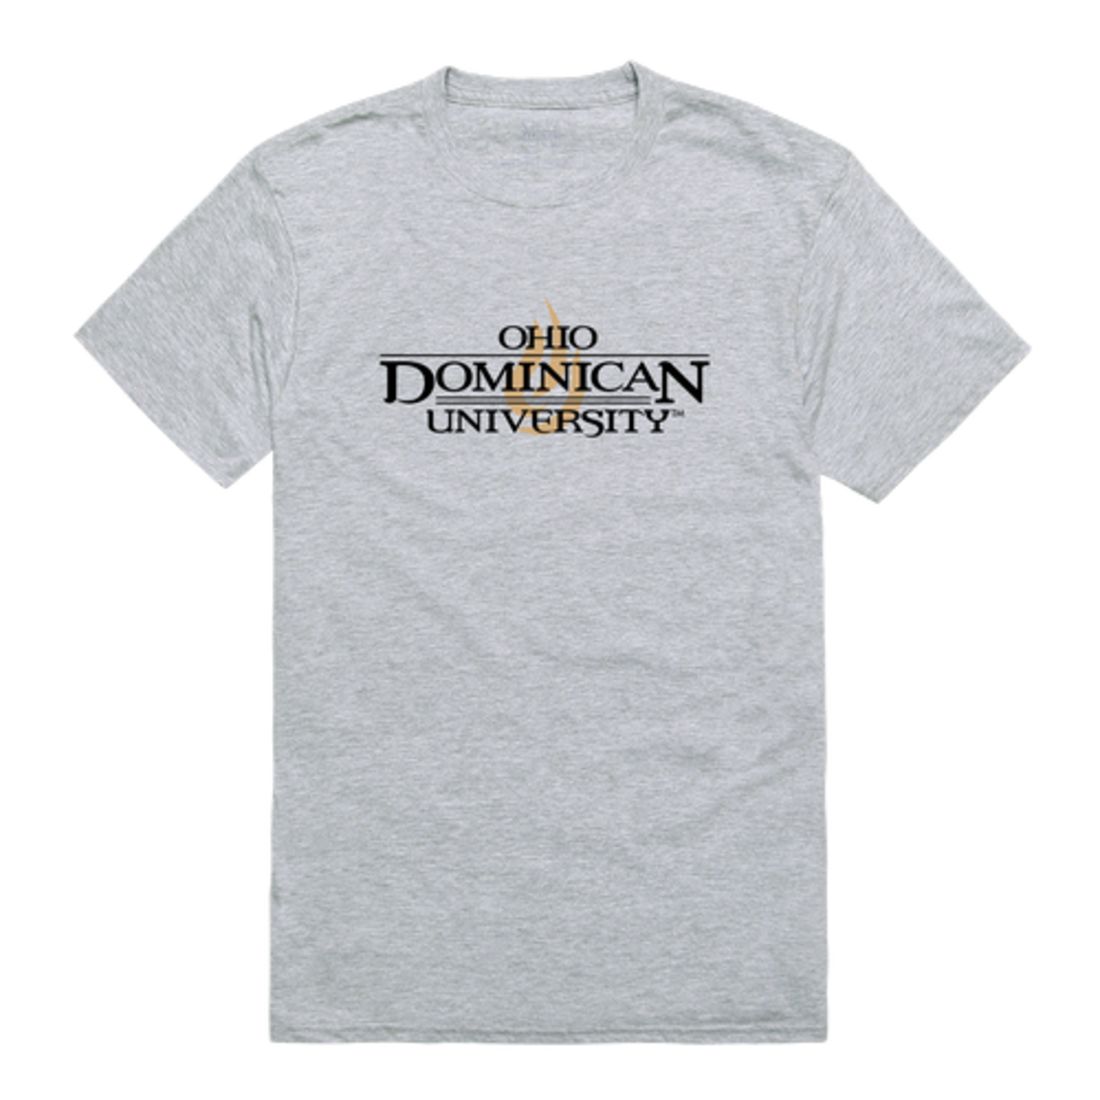 Ohio Dominican University Panthers Institutional T-Shirt Tee